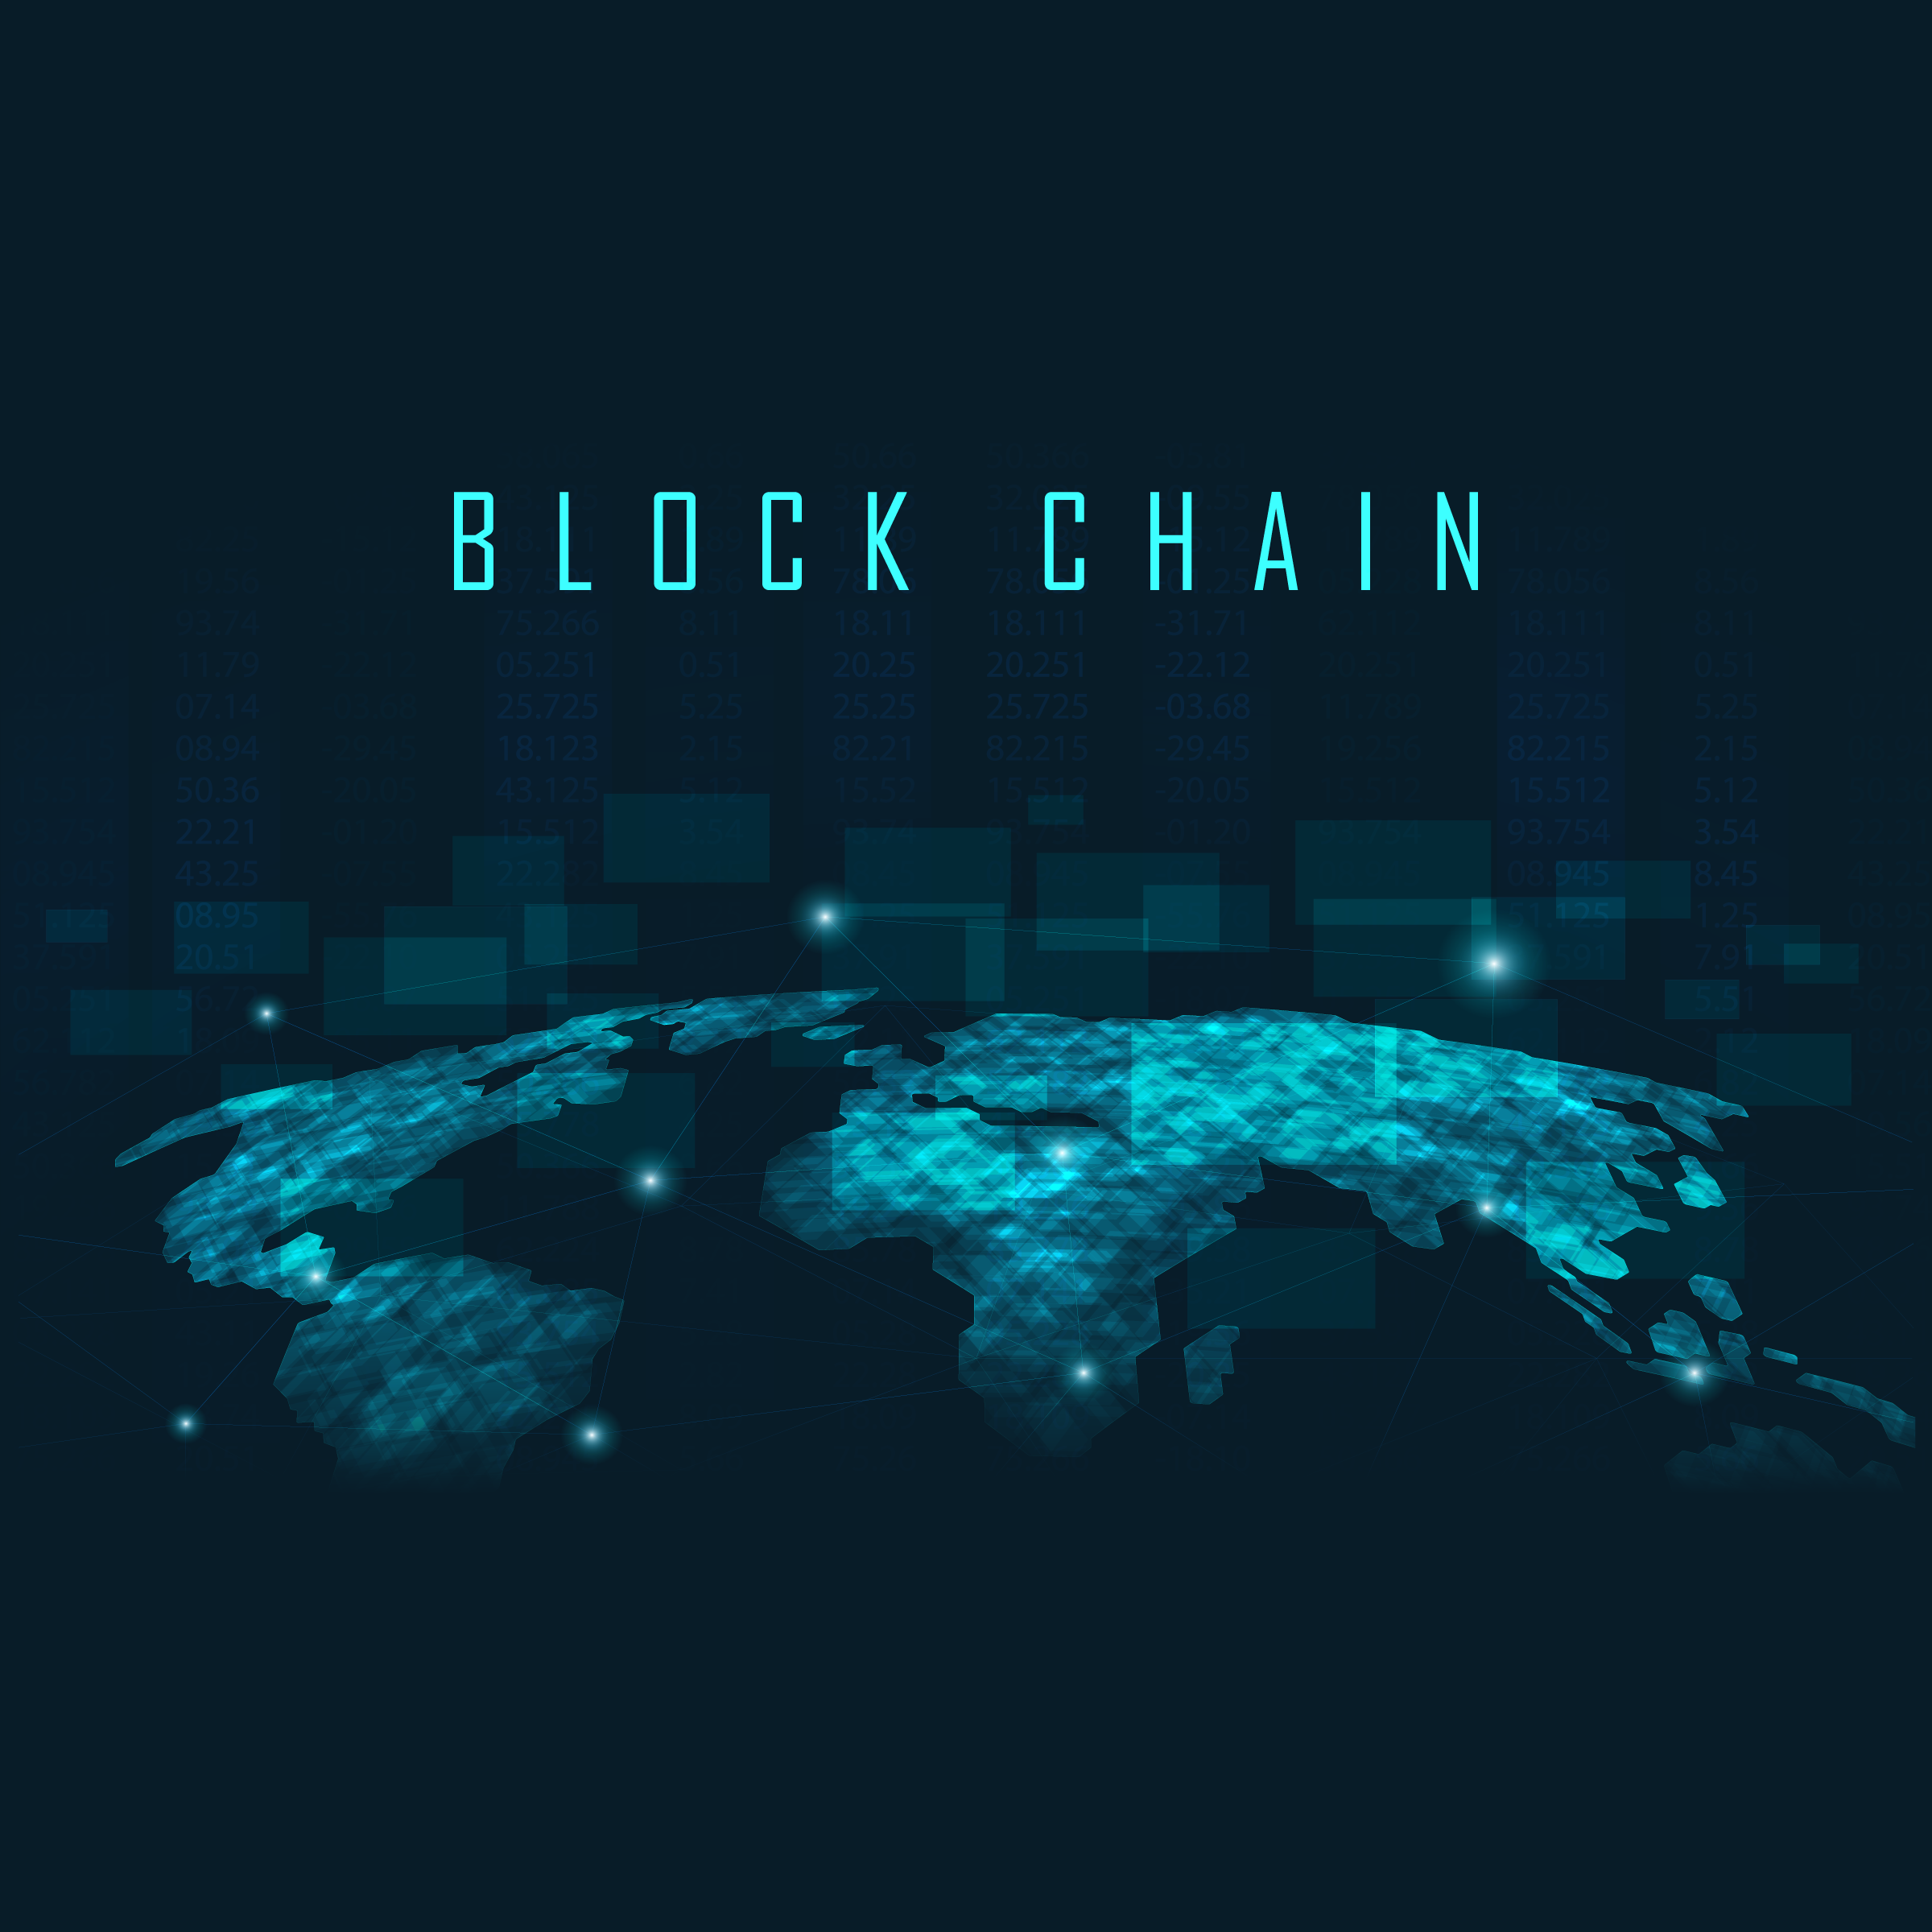 Blockchain : The invisible system that transforms the world